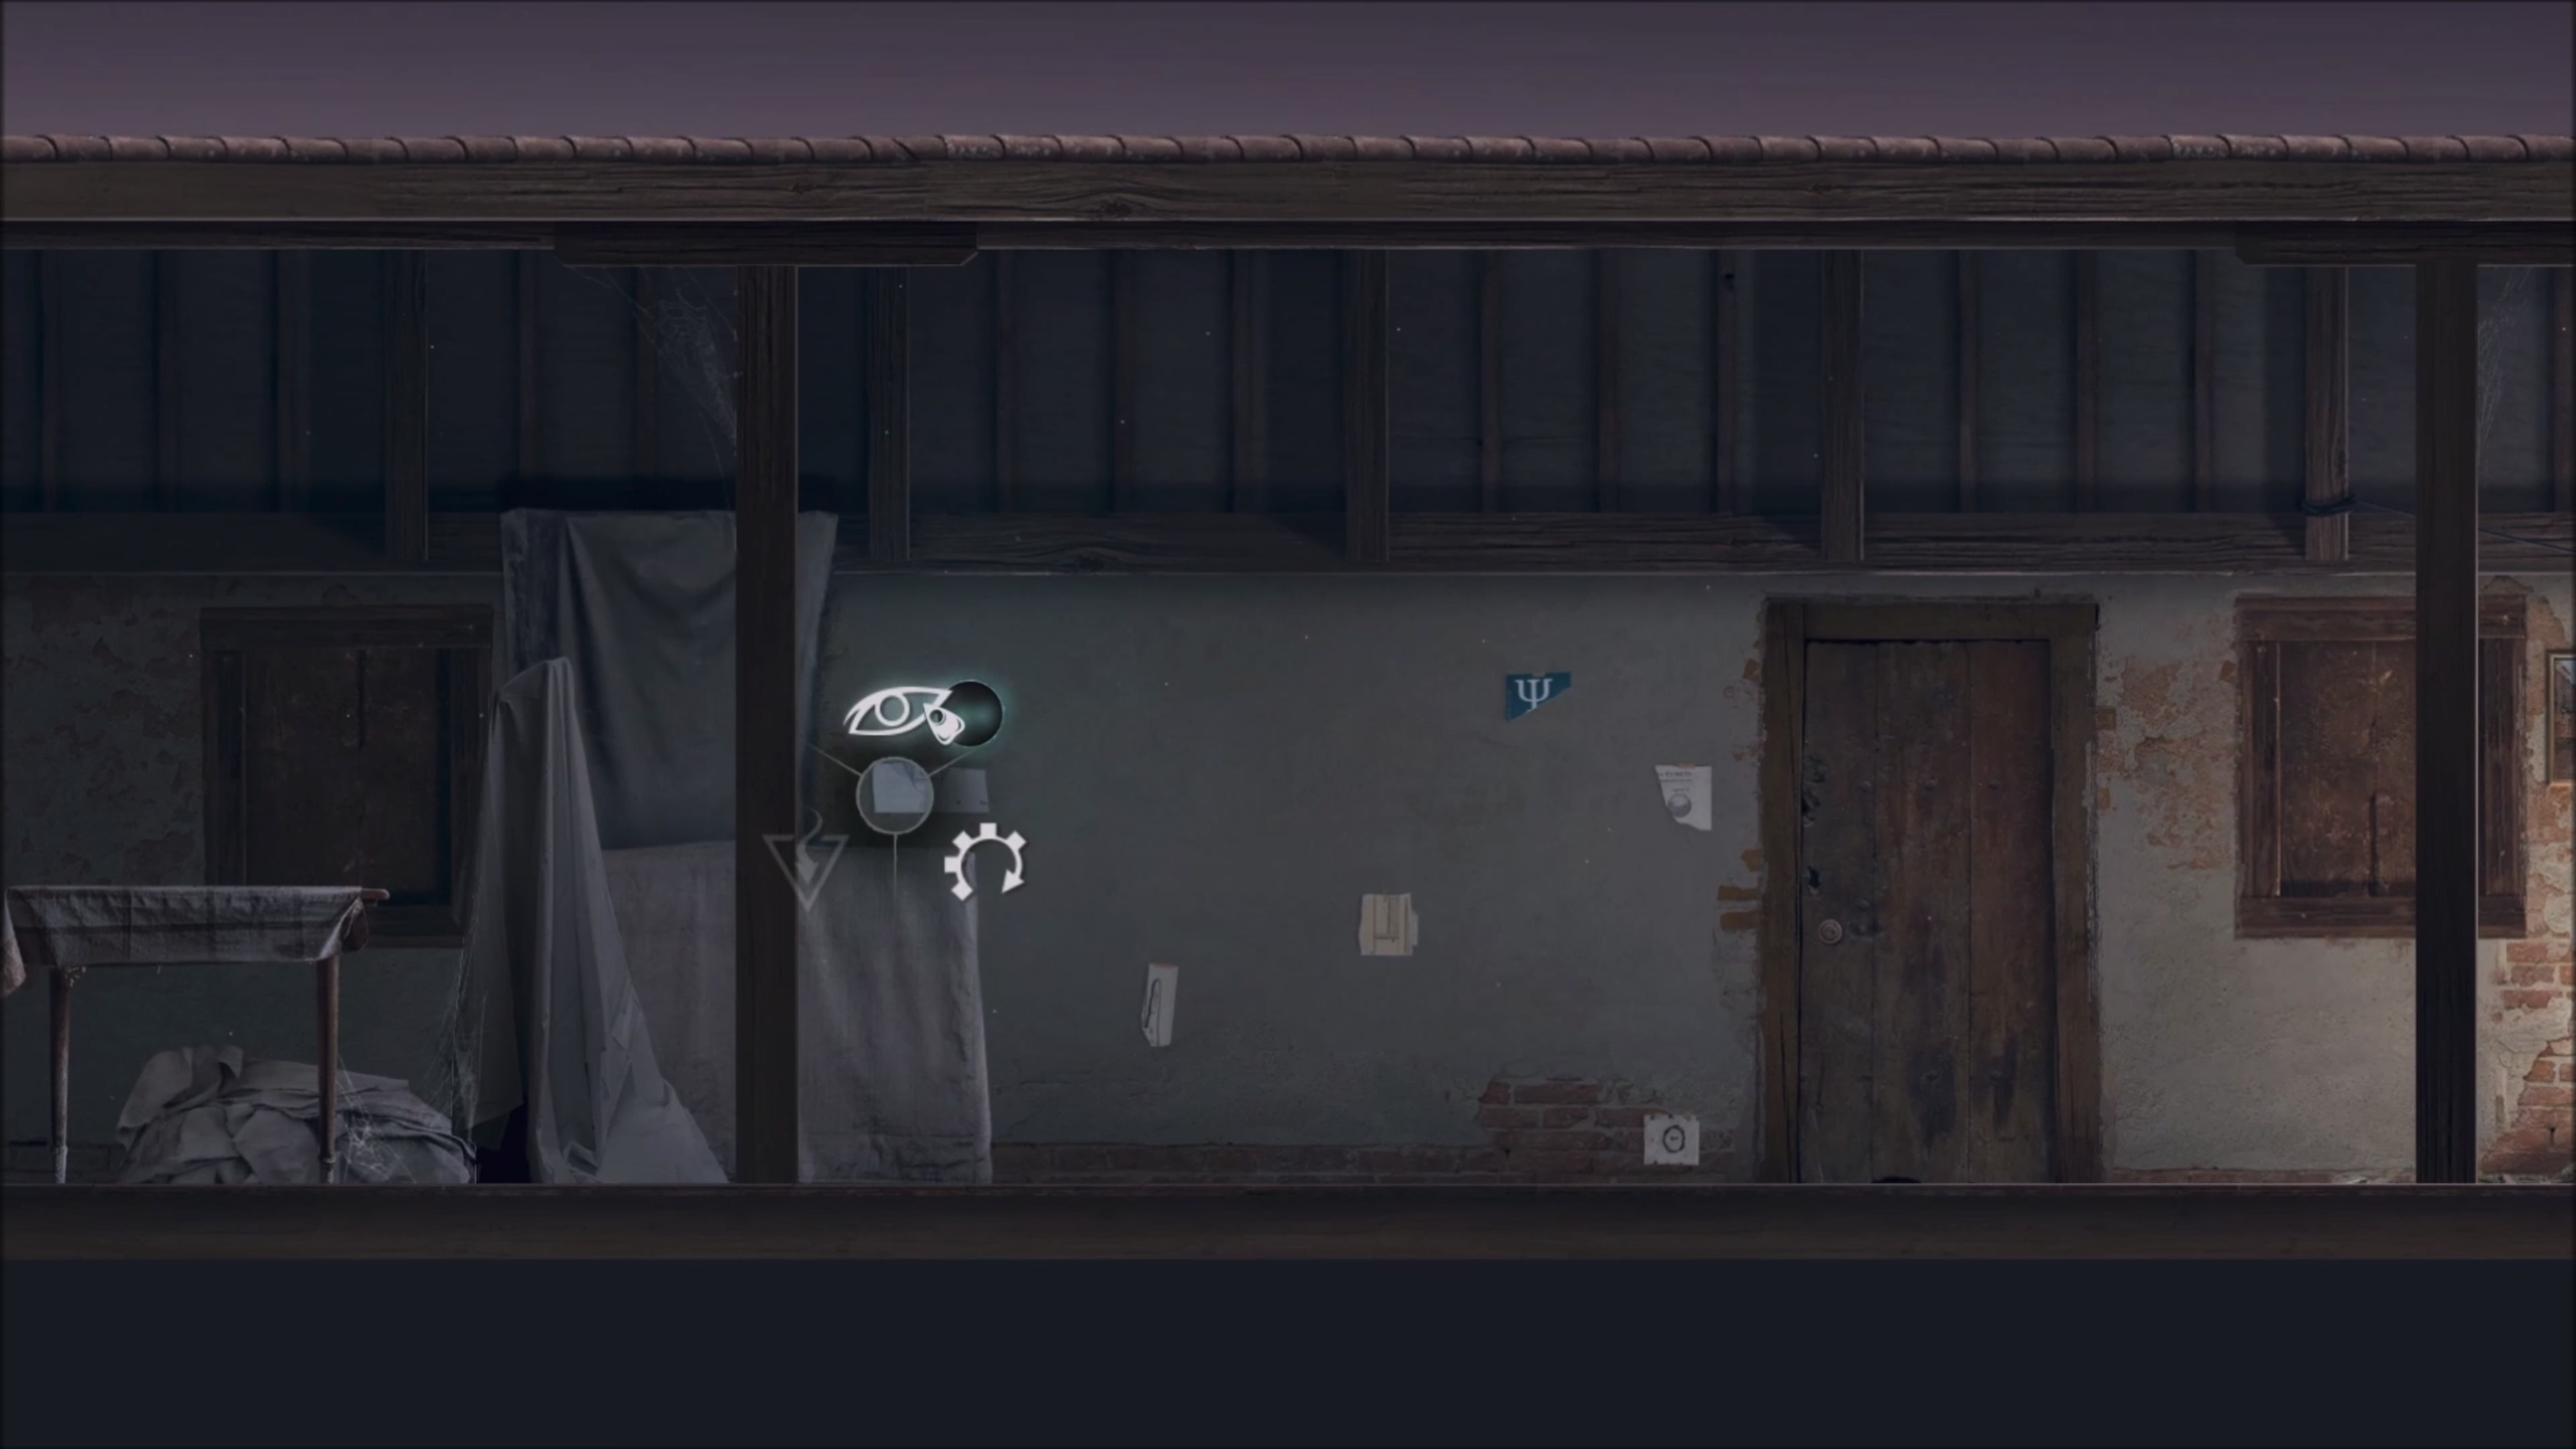 Gameplay screenshot of the Goetia 2 game. The image shows a floating menu with three different actions that the player can do. The player is a ghost that is inside an abandoned room with covered furniture and old posters on the wall.